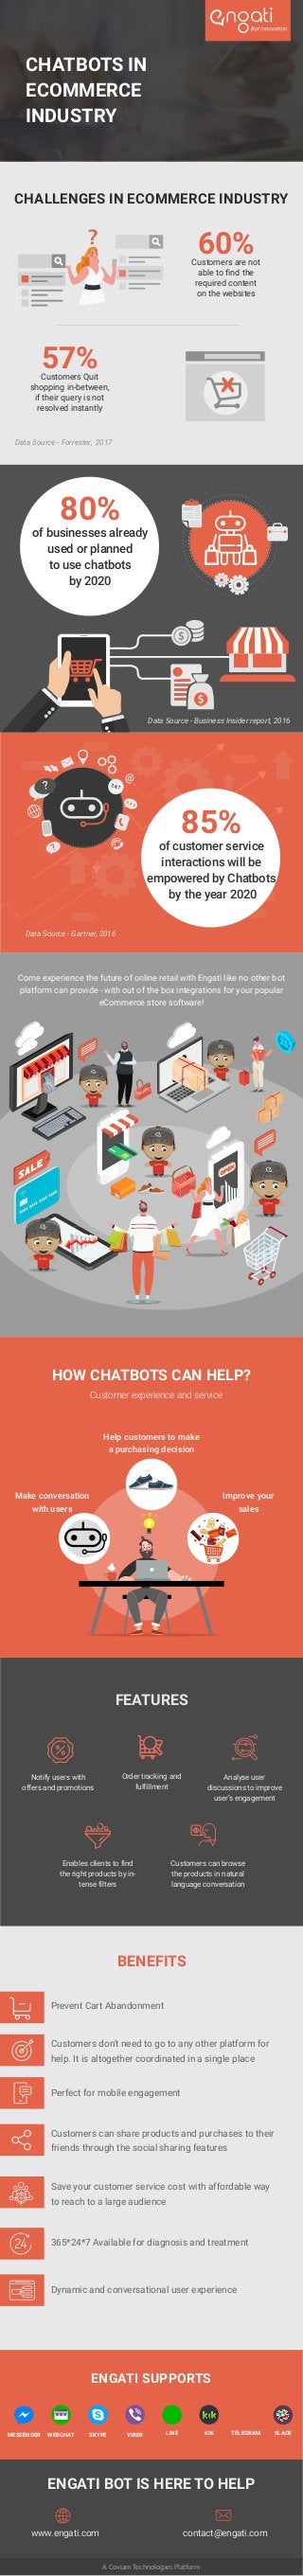 CHATBOTS IN
ECOMMERCE
INDUSTRY
FEATURES
Notify users with
offers and promotions
Analyse user
discussions to improve
user’s engagement
Order tracking and
fulfillment
Enables clients to find
the right products by in-
tense filters
Customers can browse
the products in natural
language conversation
ENGATI BOT IS HERE TO HELP
www.engati.com contact@engati.com
ENGATI SUPPORTS
LINE KIK TELEGRAM SLACKMESSENGER WEBCHAT SKYPE VIBER
A Coviam Technologies Platform
CHALLENGES IN ECOMMERCE INDUSTRY
Data Source - Forrester, 2017
x
57%Customers Quit
shopping in-between,
if their query is not
resolved instantly
? 60%Customers are not
able to find the
required content
on the websites
Data Source - Business Insider report, 2016
80%
of businesses already
used or planned
to use chatbots
by 2020
85%
of customer service
interactions will be
empowered by Chatbots
by the year 2020
Data Source - Gartner, 2016
? 24/7
@
Come experience the future of online retail with Engati like no other bot
platform can provide - with out of the box integrations for your popular
eCommerce store software!
nbo
nbo
nbo
nbo
nbo
Prevent Cart Abandonment
Customers don't need to go to any other platform for
help. It is altogether coordinated in a single place
Perfect for mobile engagement
Customers can share products and purchases to their
friends through the social sharing features
Save your customer service cost with affordable way
to reach to a large audience
365*24*7 Available for diagnosis and treatment
Dynamic and conversational user experience
BENEFITS
HOW CHATBOTS CAN HELP?
Customer experience and service
Improve your
sales
Make conversation
with users
Help customers to make
a purchasing decision
 